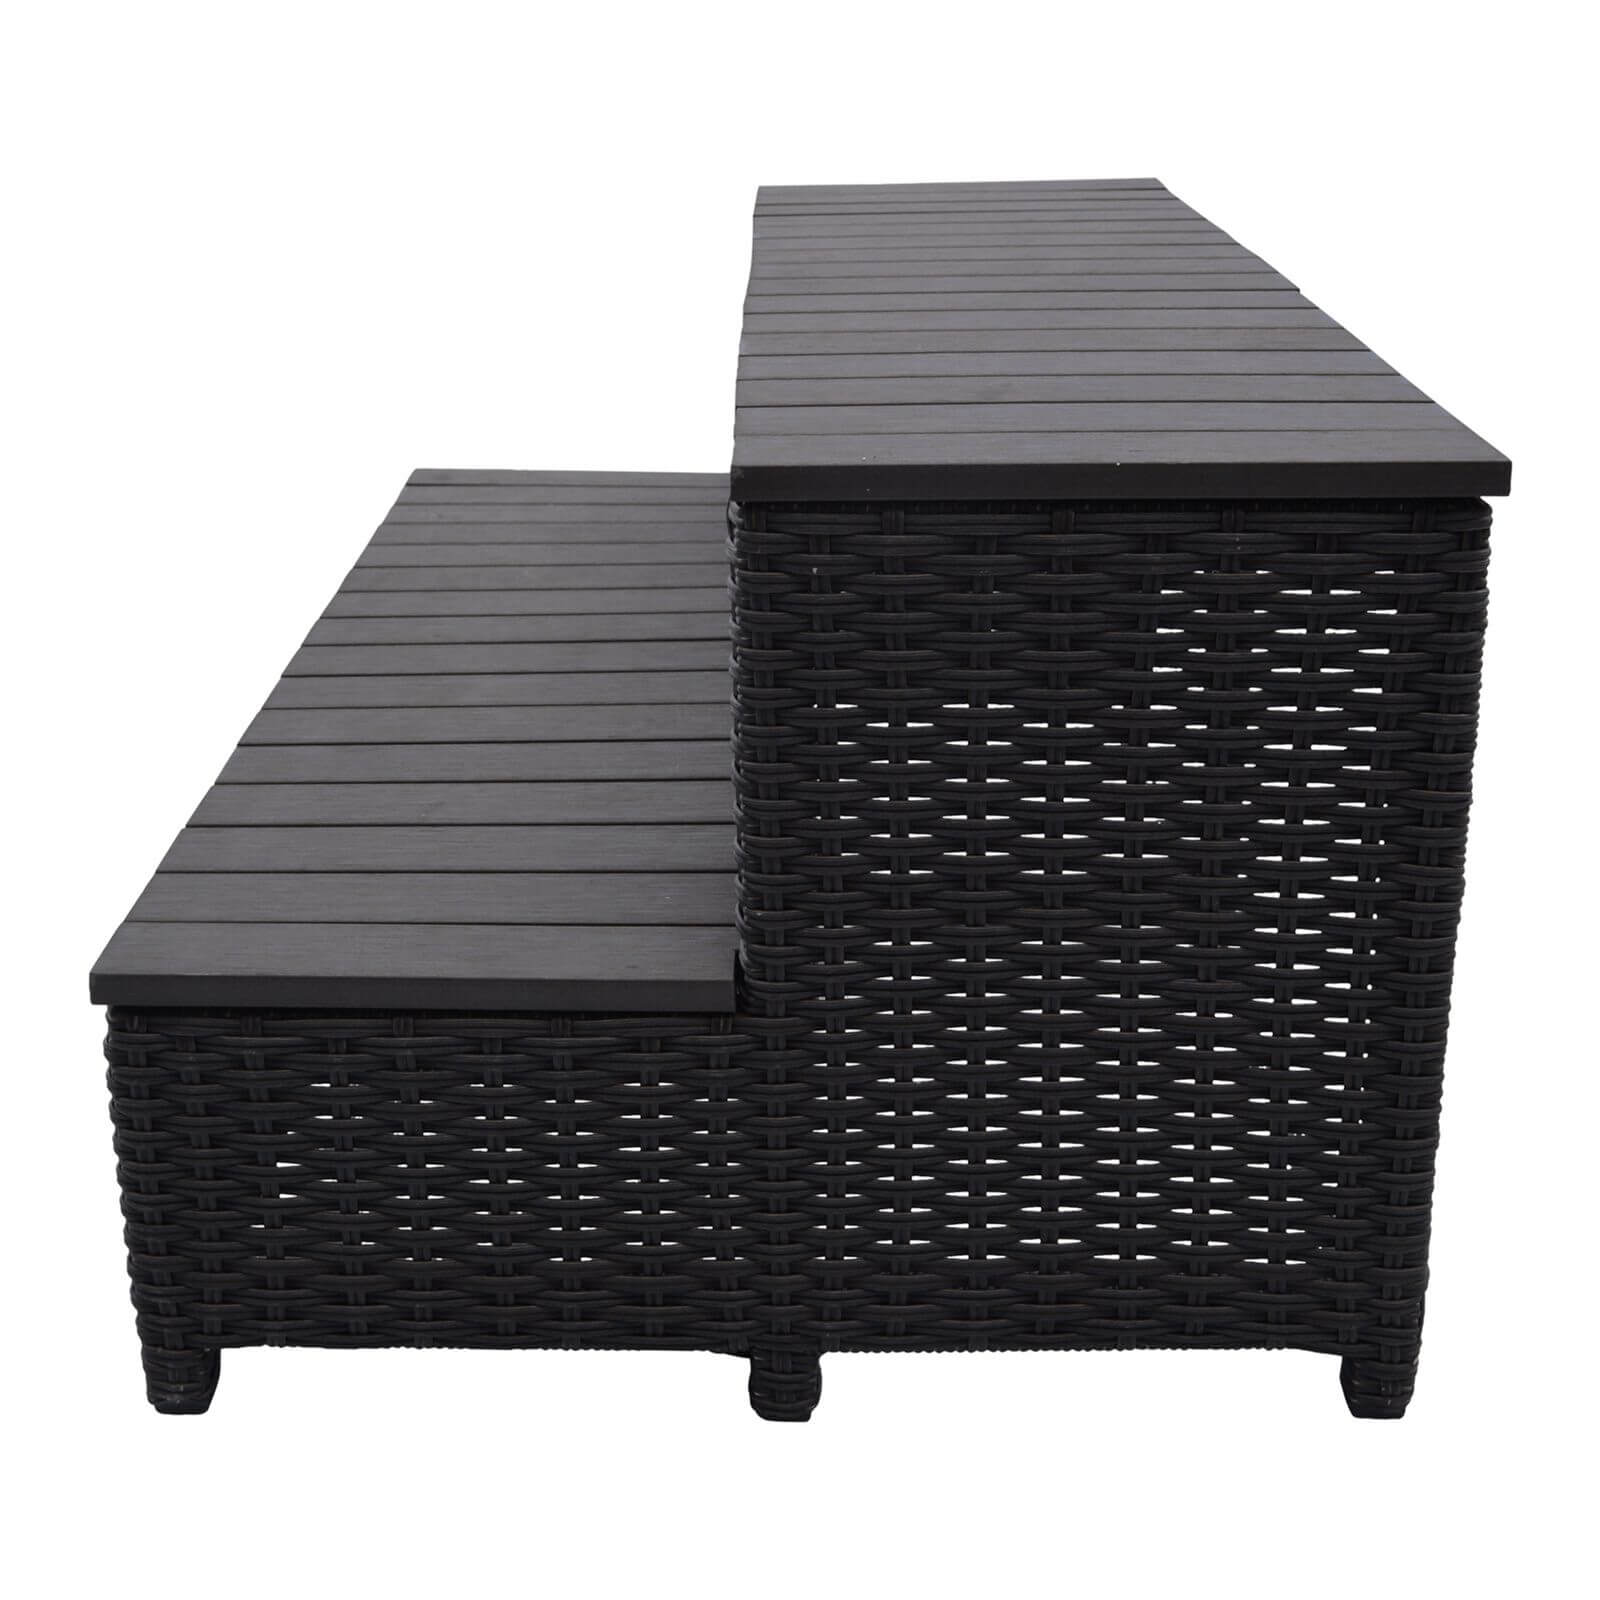 Canadian Spa Rattan Square Spa Step for 84in Hot Tub